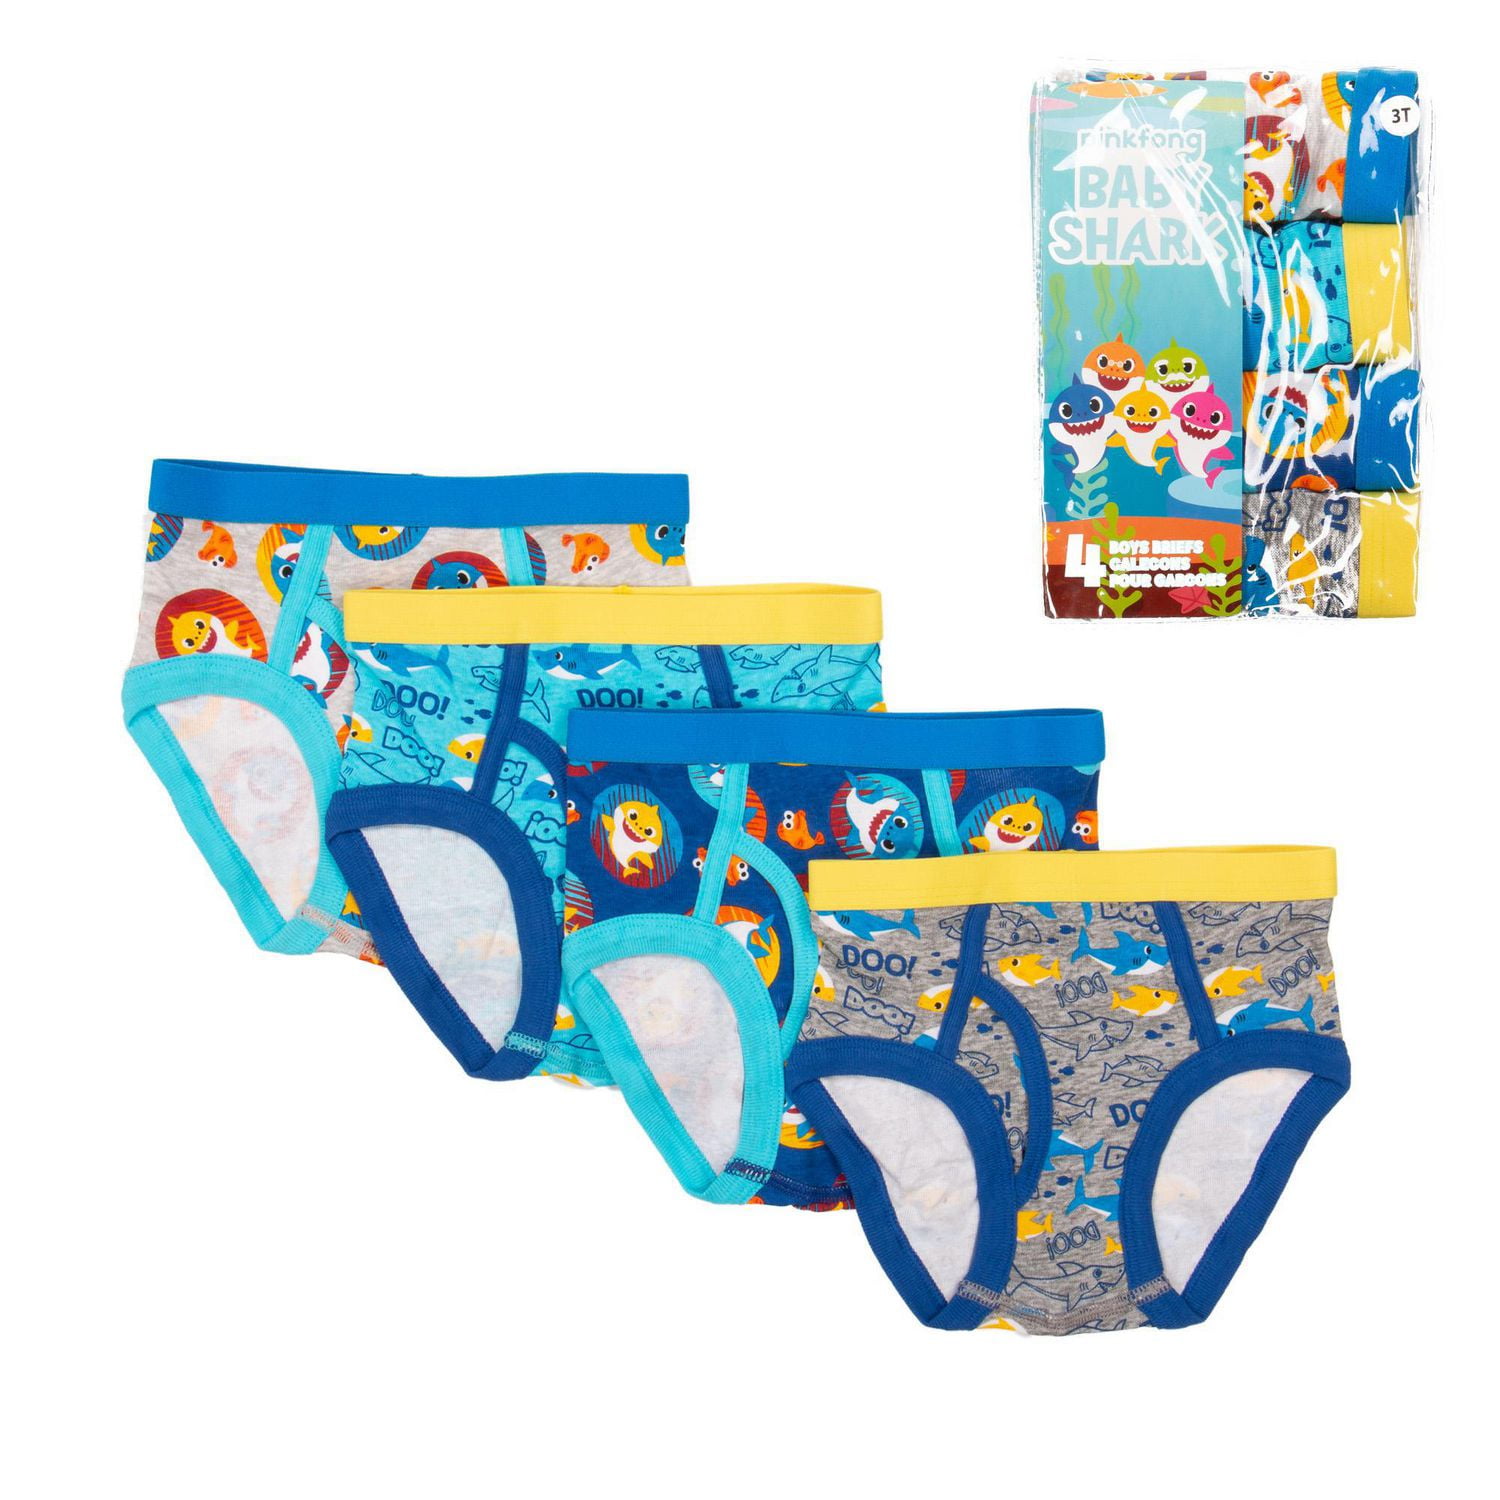 Manufacturer and wholesaler of BOXERS PACK 5 PIECES BABY SHARK